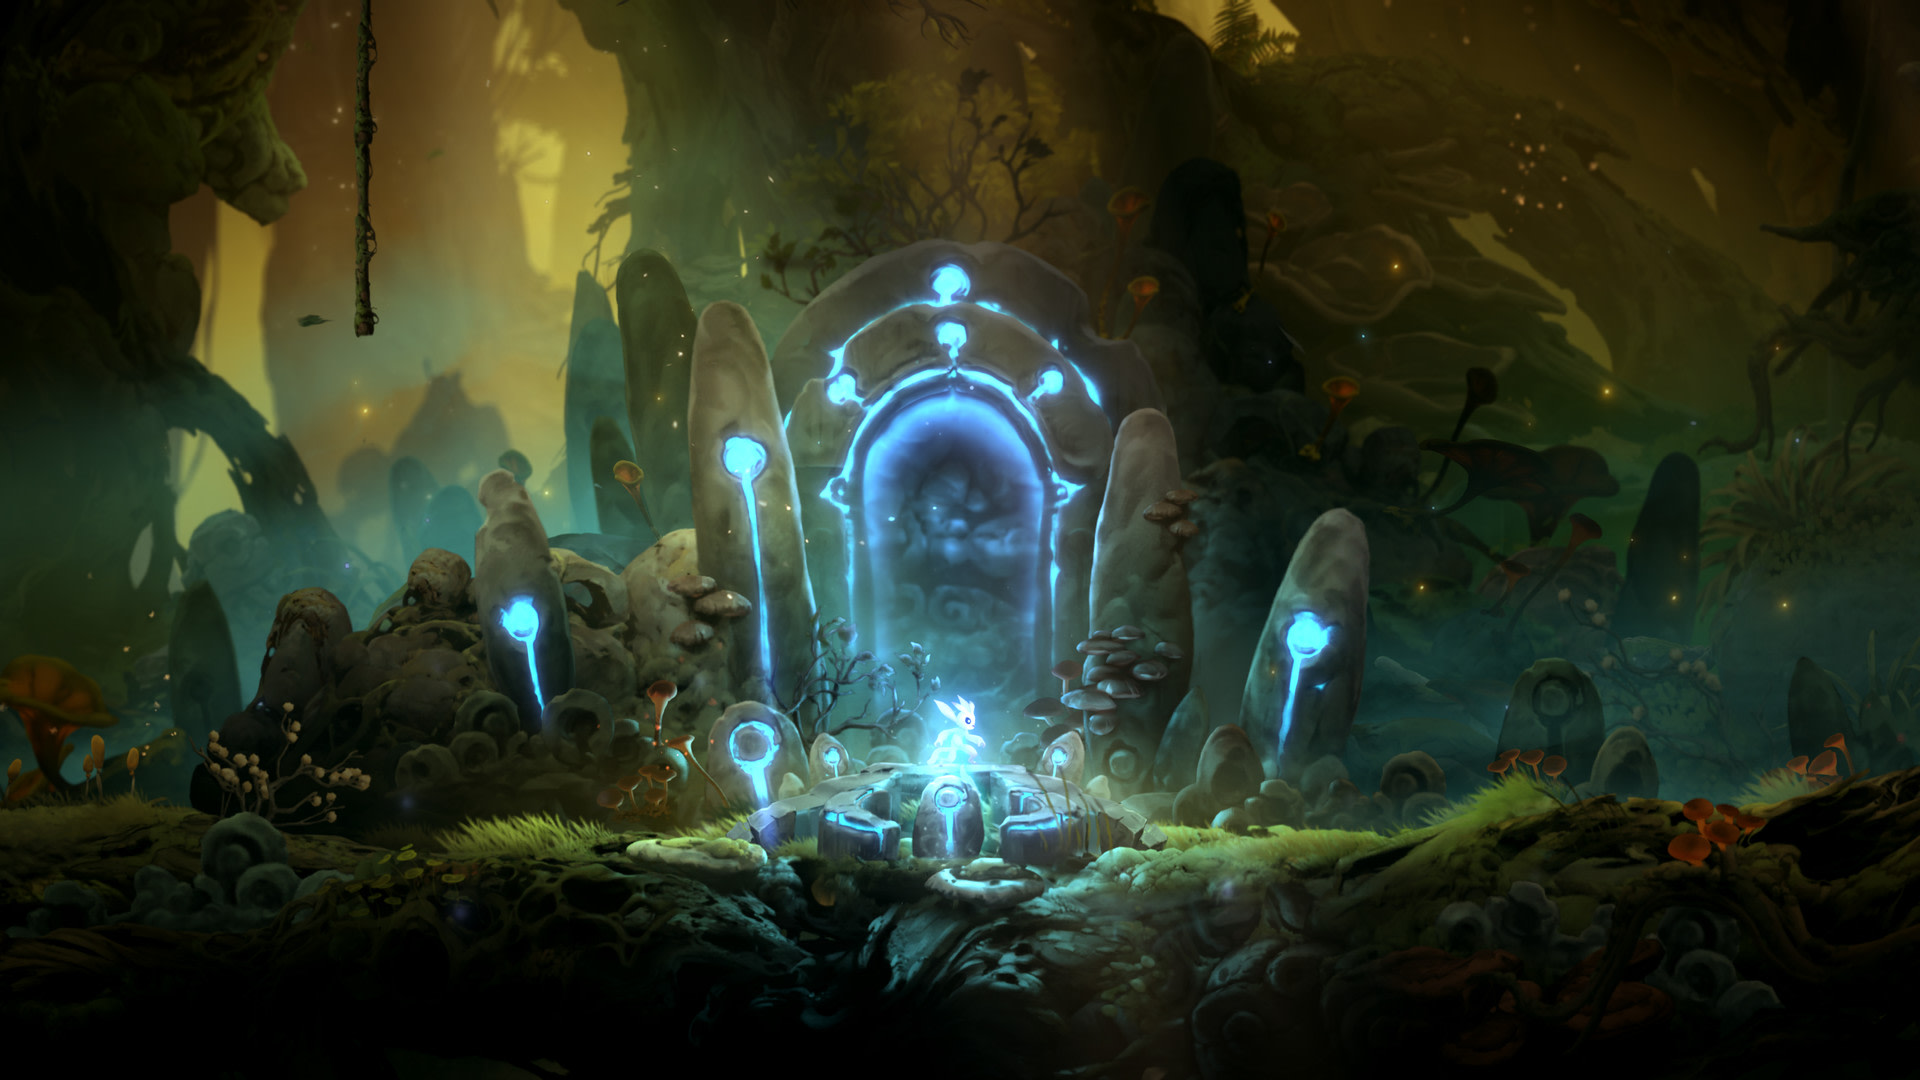 ori and the will of the wisps, video game